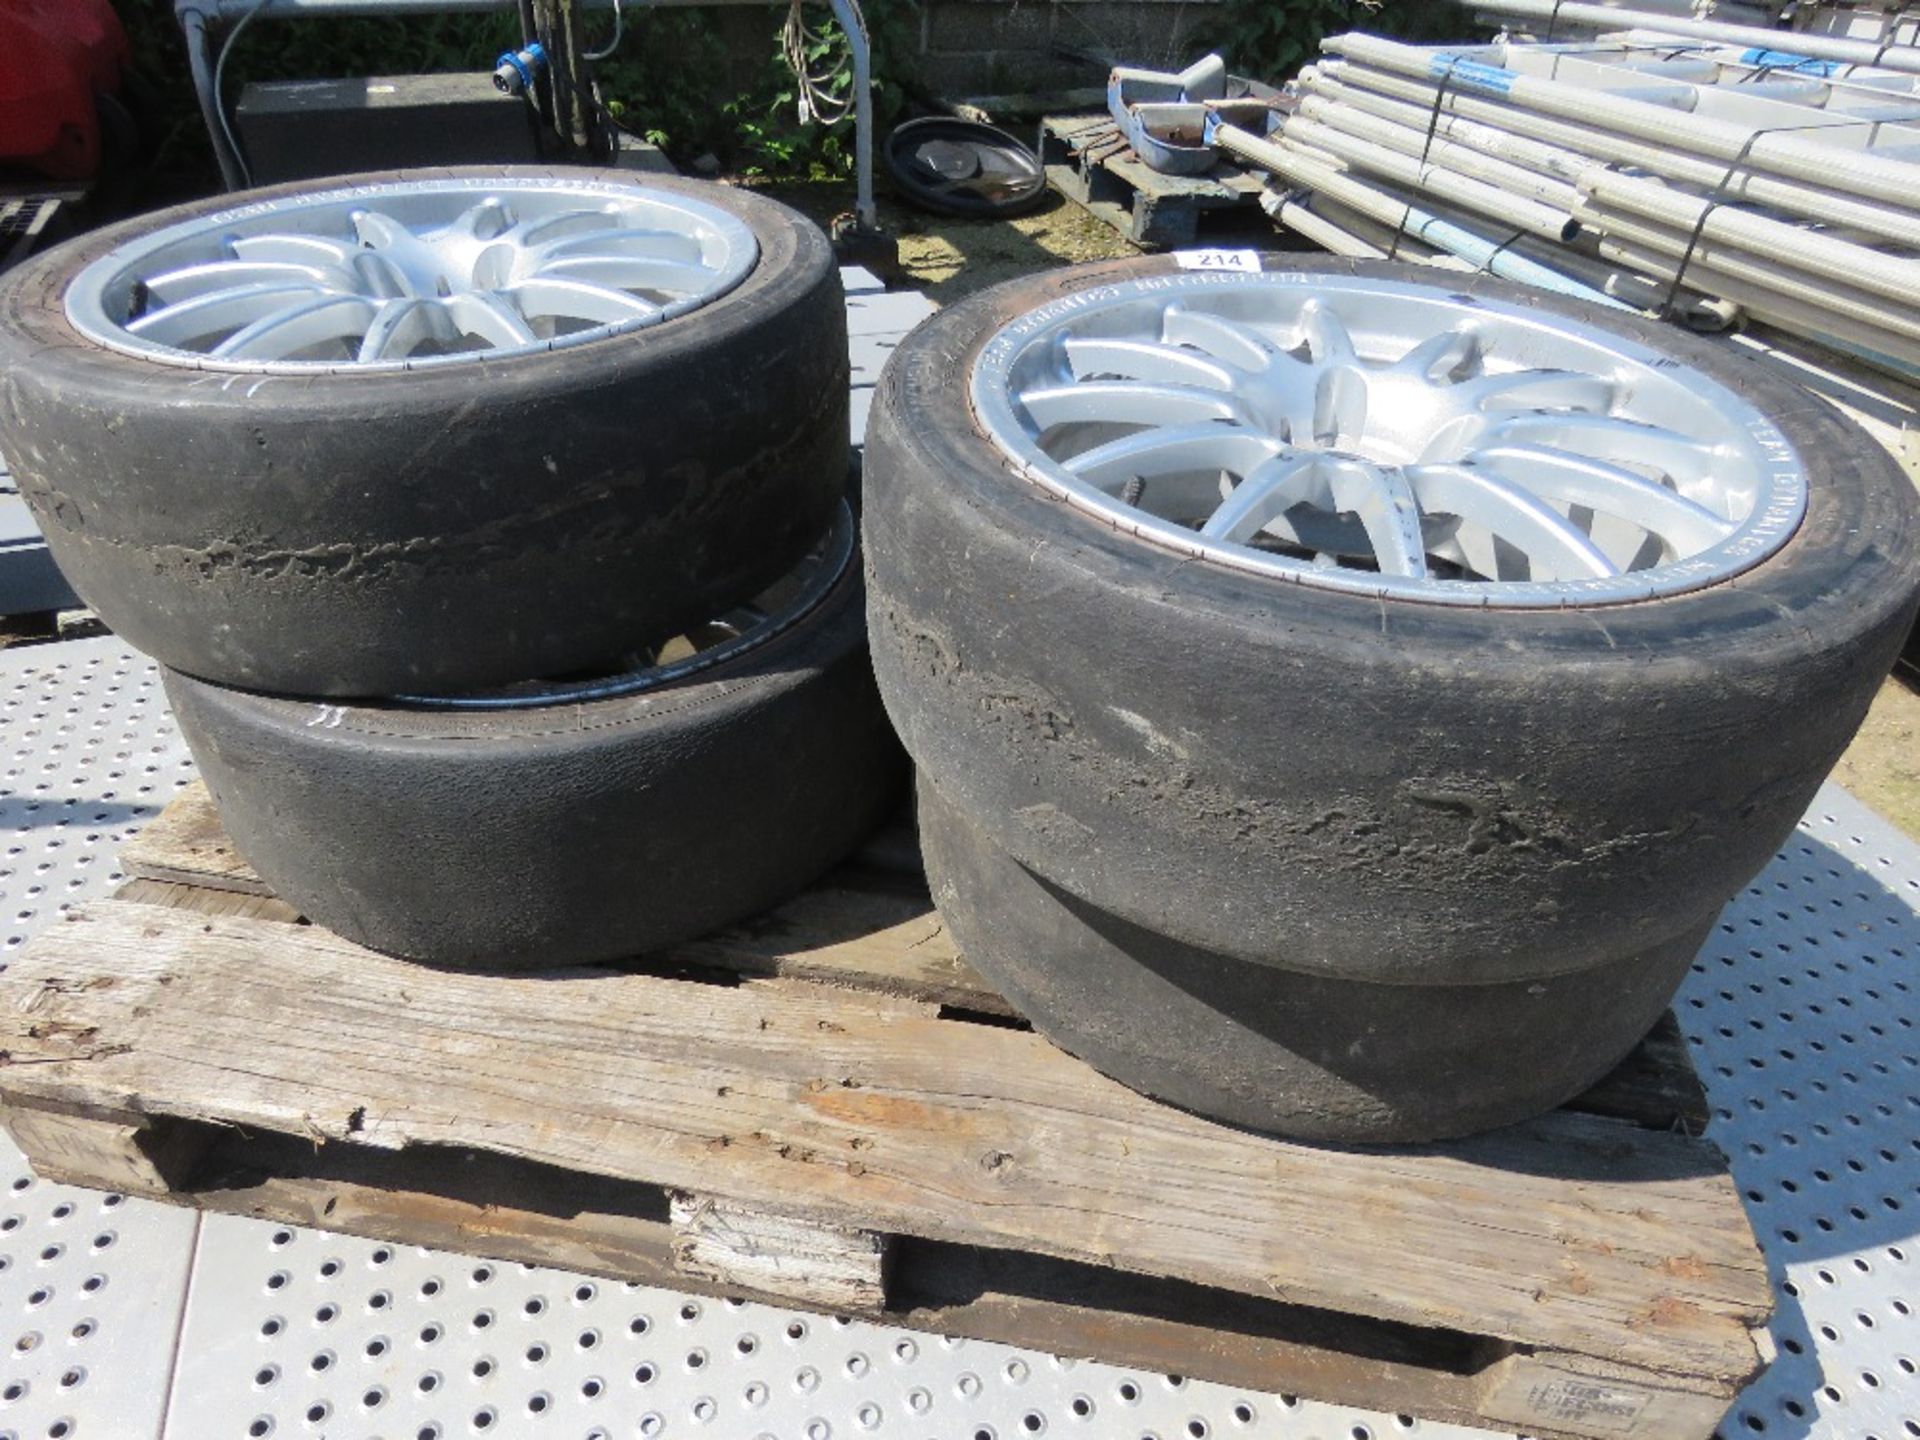 SET OF 4NO TEAM DYNAMICS MOTORSPORT RACING WHEELS AND TYRES, PREVIOUSLY USED ON AN ALFA ROMEO 33 RA